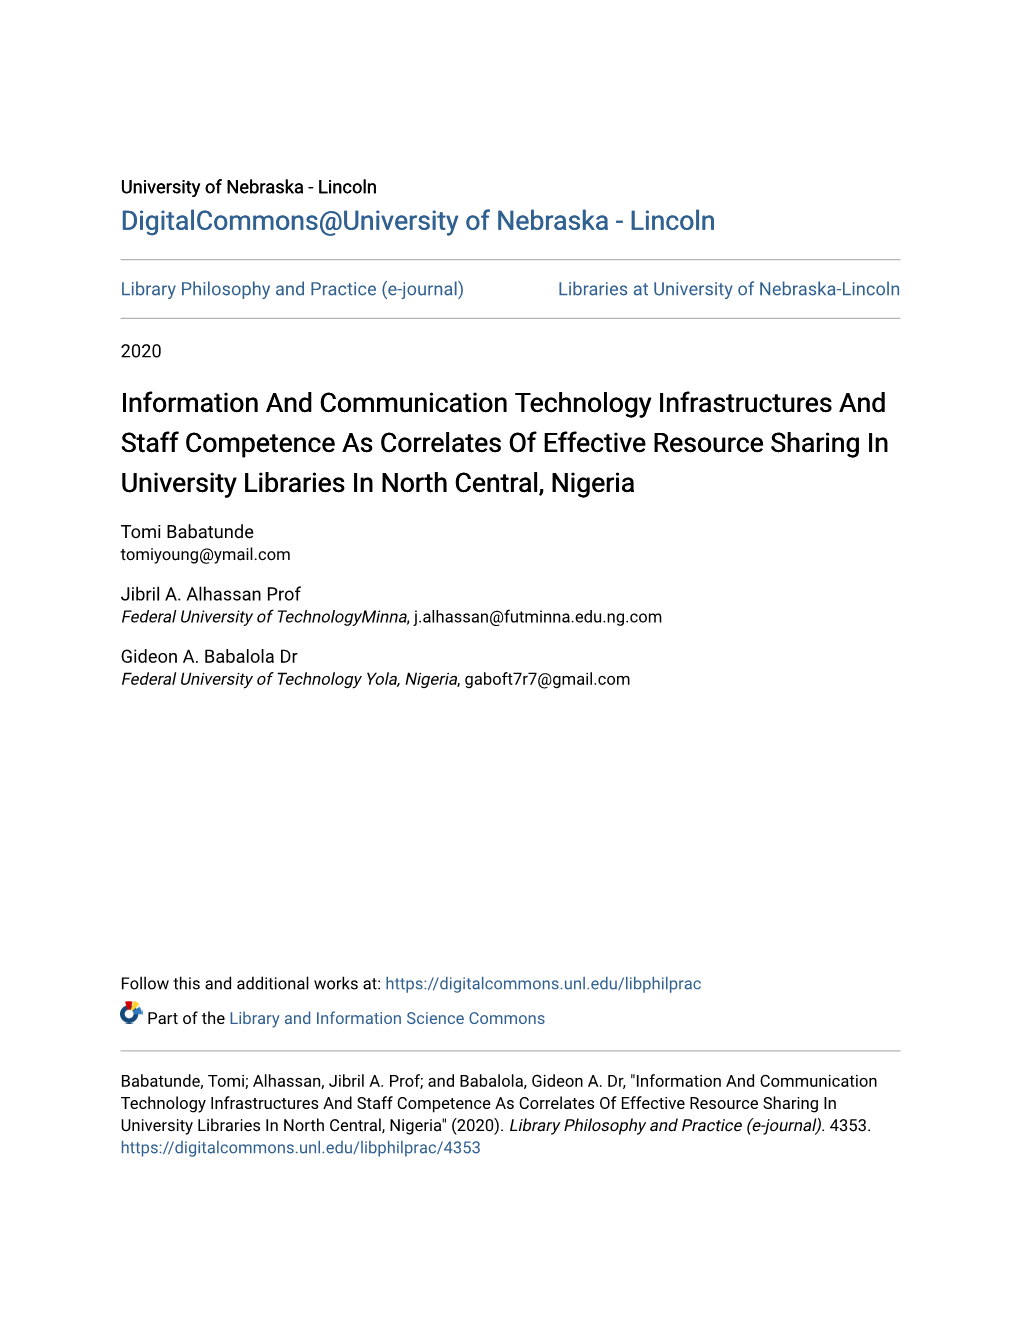 Information and Communication Technology Infrastructures And